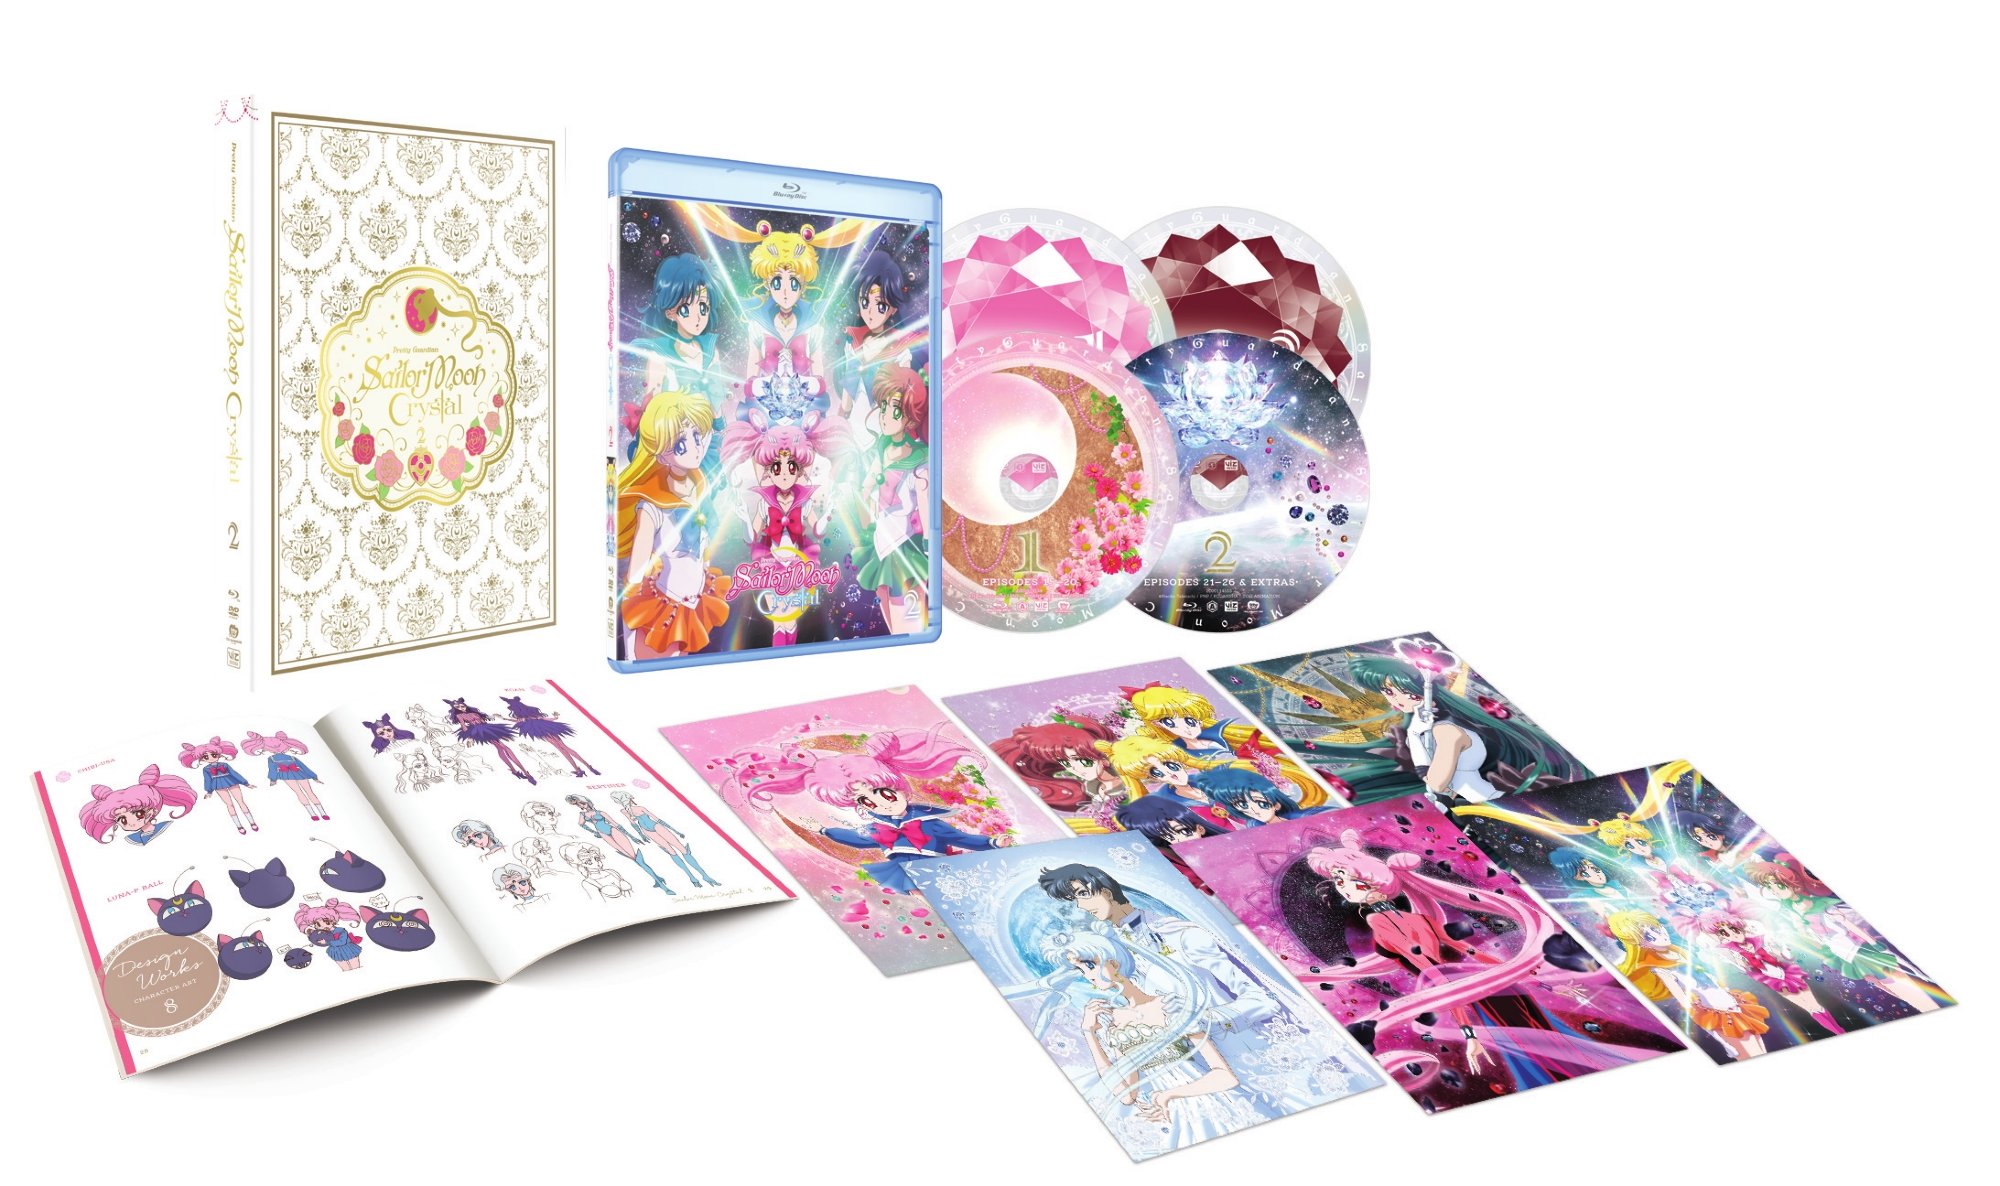 Sailor Moon Crystal Set 2 Limited Edition Blu-ray/DVD image count 1